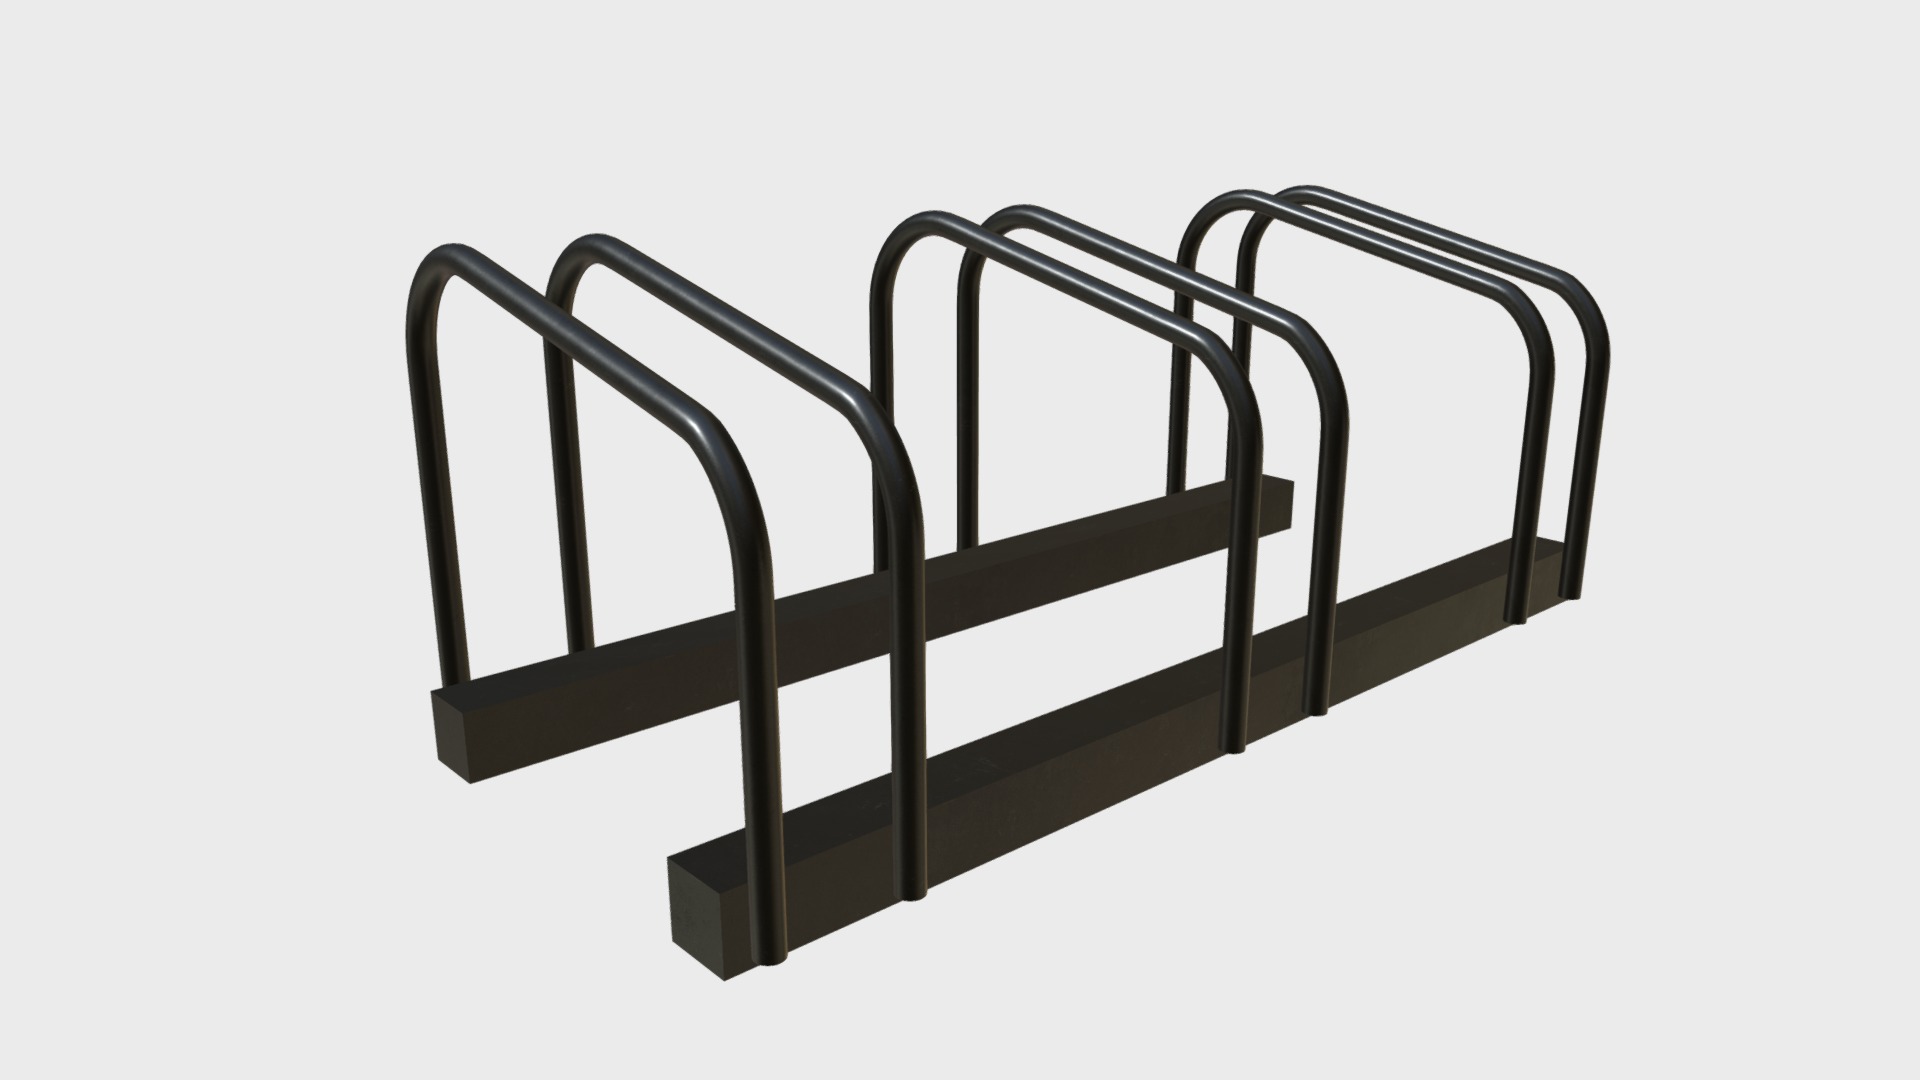 3D model Bicycle racks 2 - This is a 3D model of the Bicycle racks 2. The 3D model is about a black chair with a metal frame.